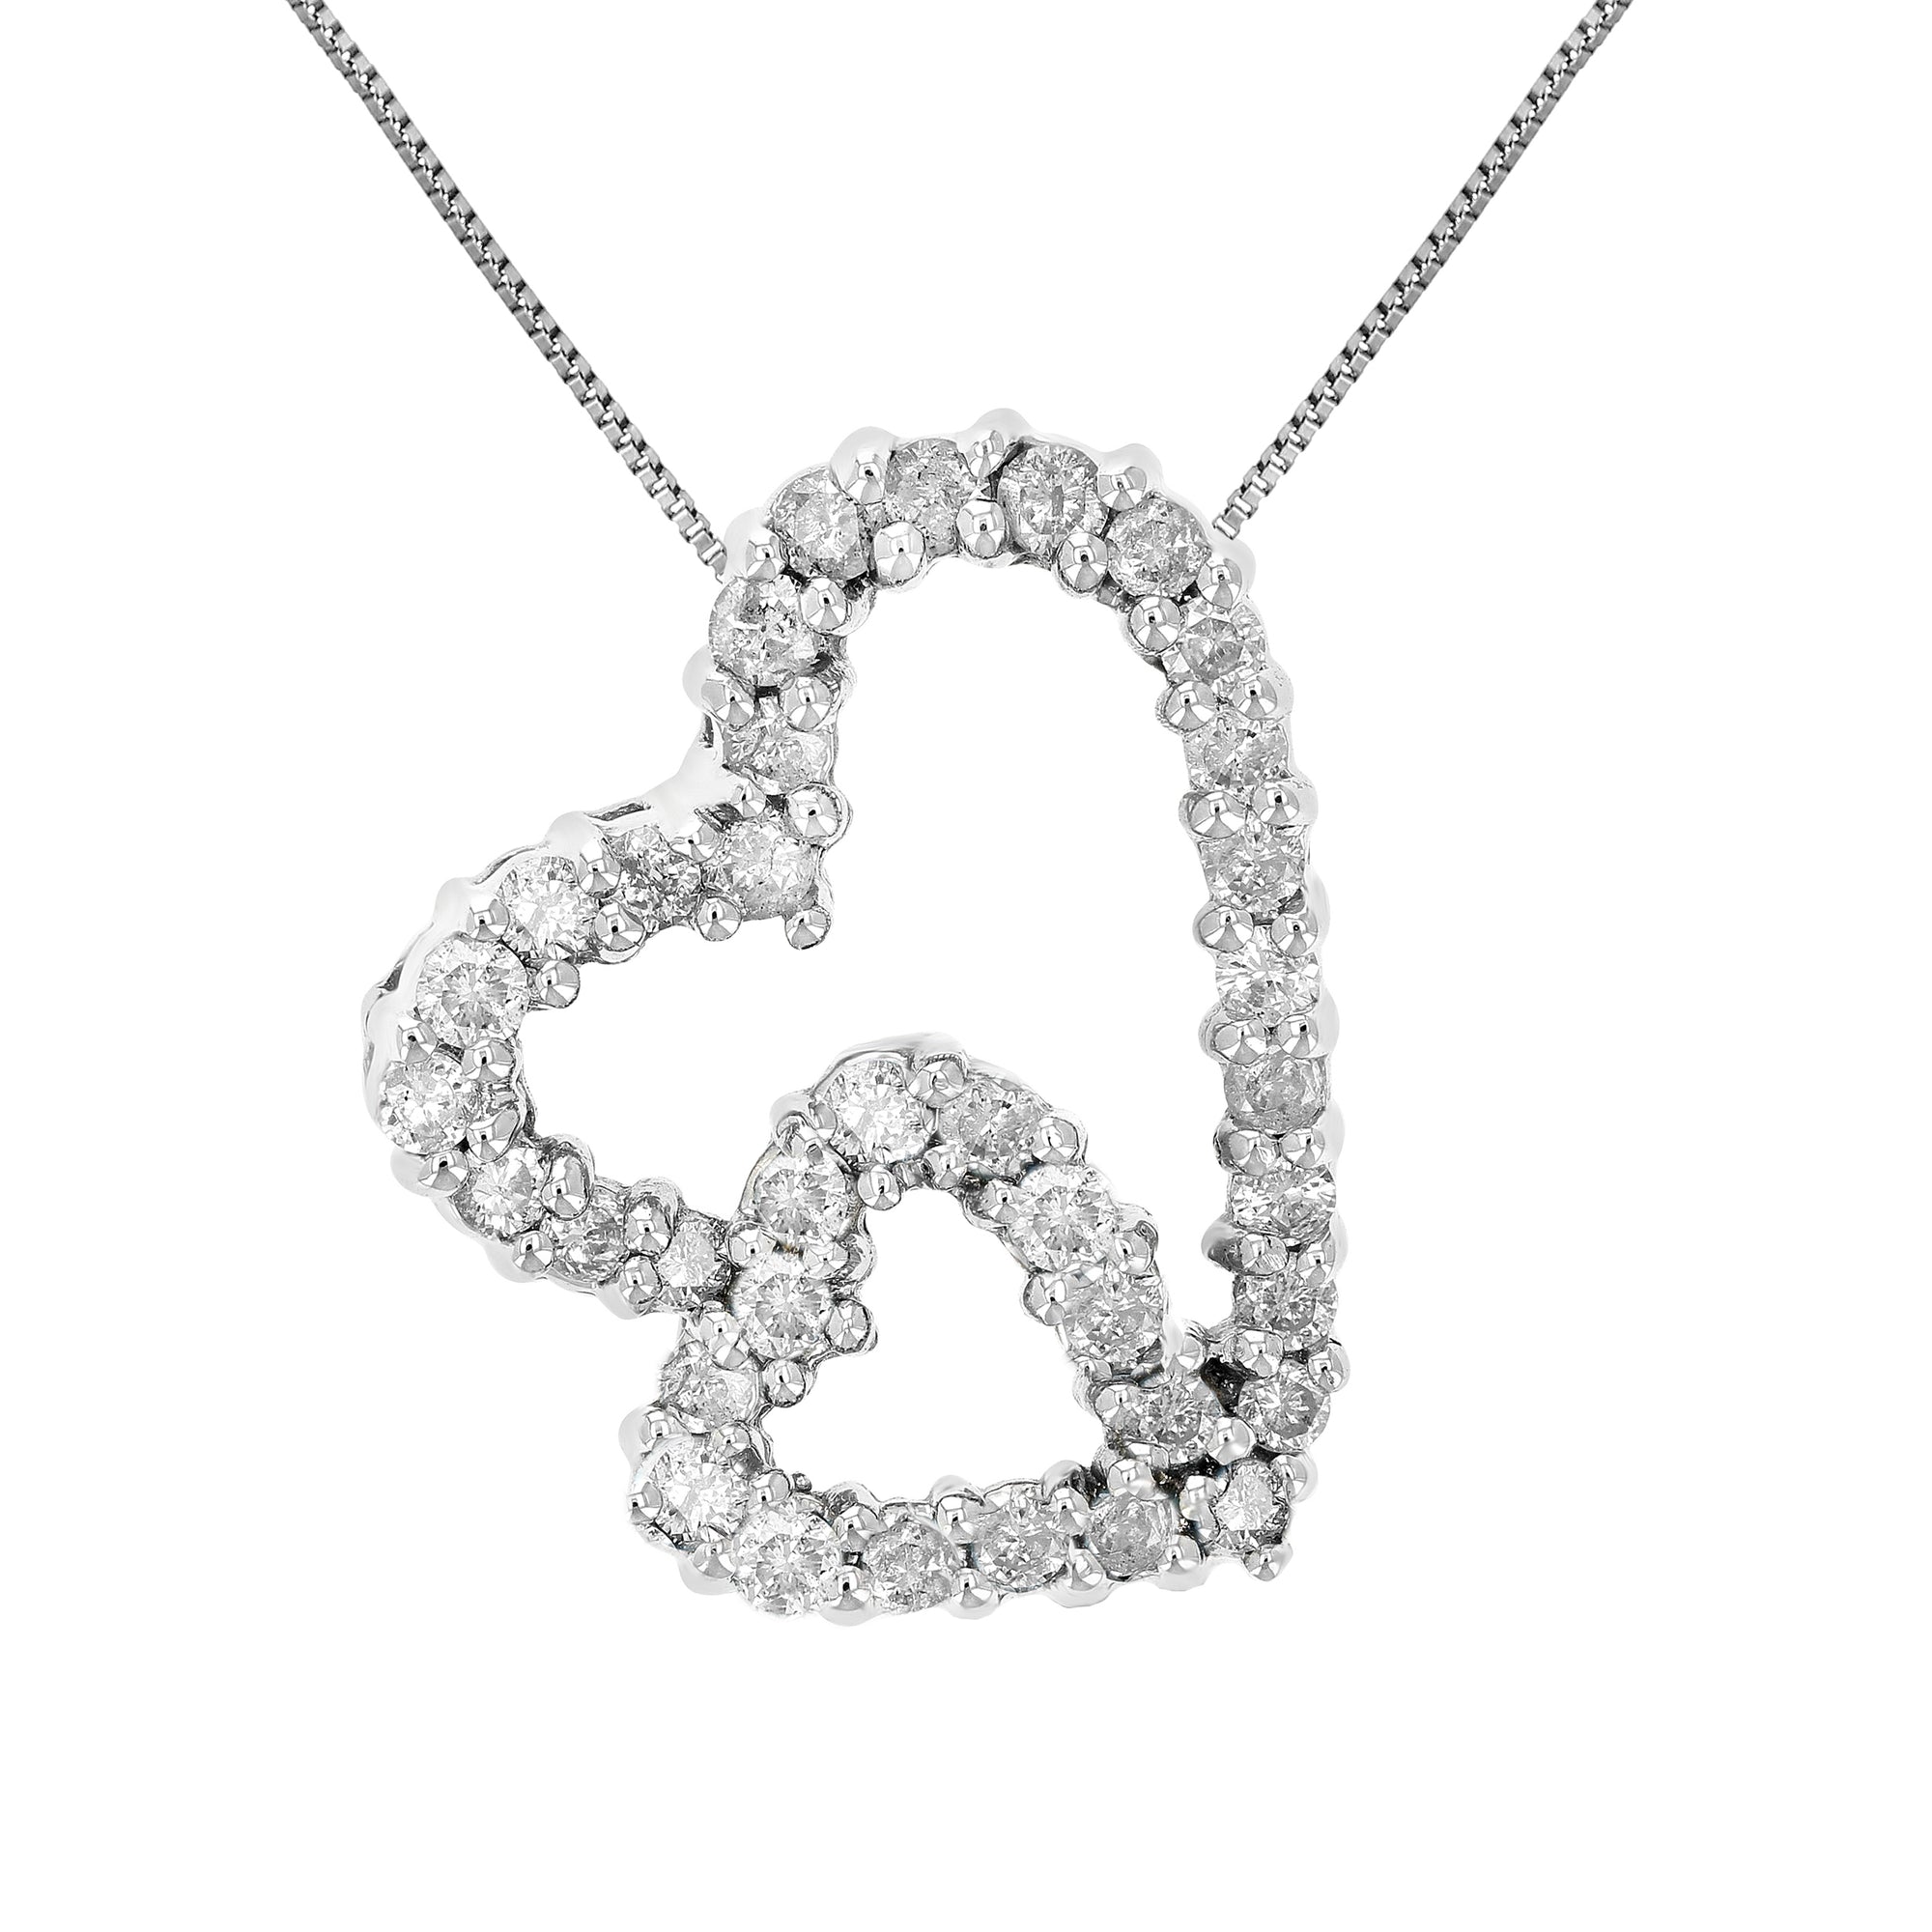 1/4 cttw Diamond Double Heart Pendant Necklace 14K White Gold with 18 Inch Chain